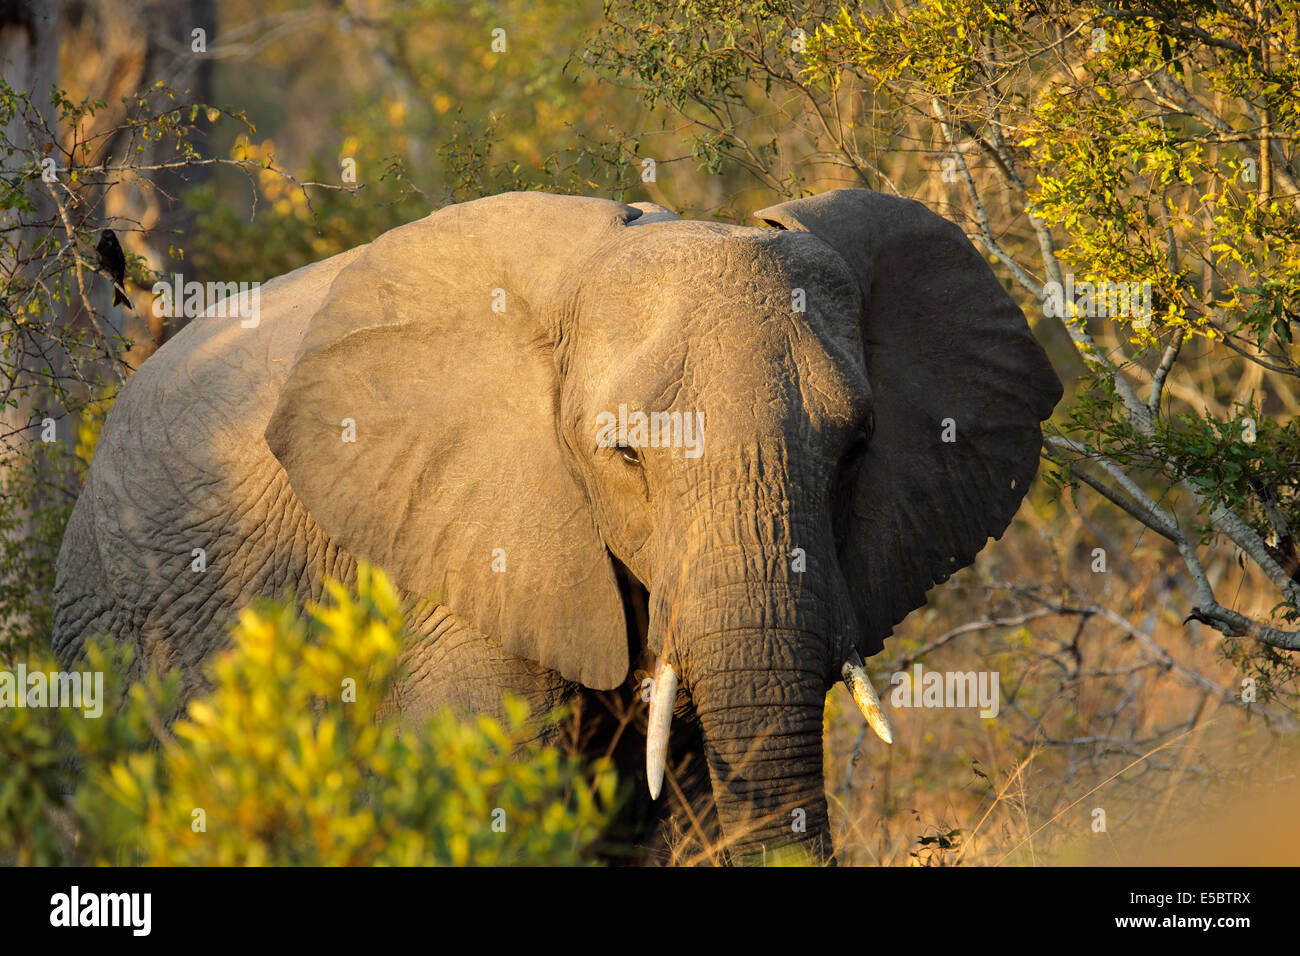 African elephant (Loxodonta africana) with large flapping ears, Sabie-Sand nature reserve, South Africa Stock Photo